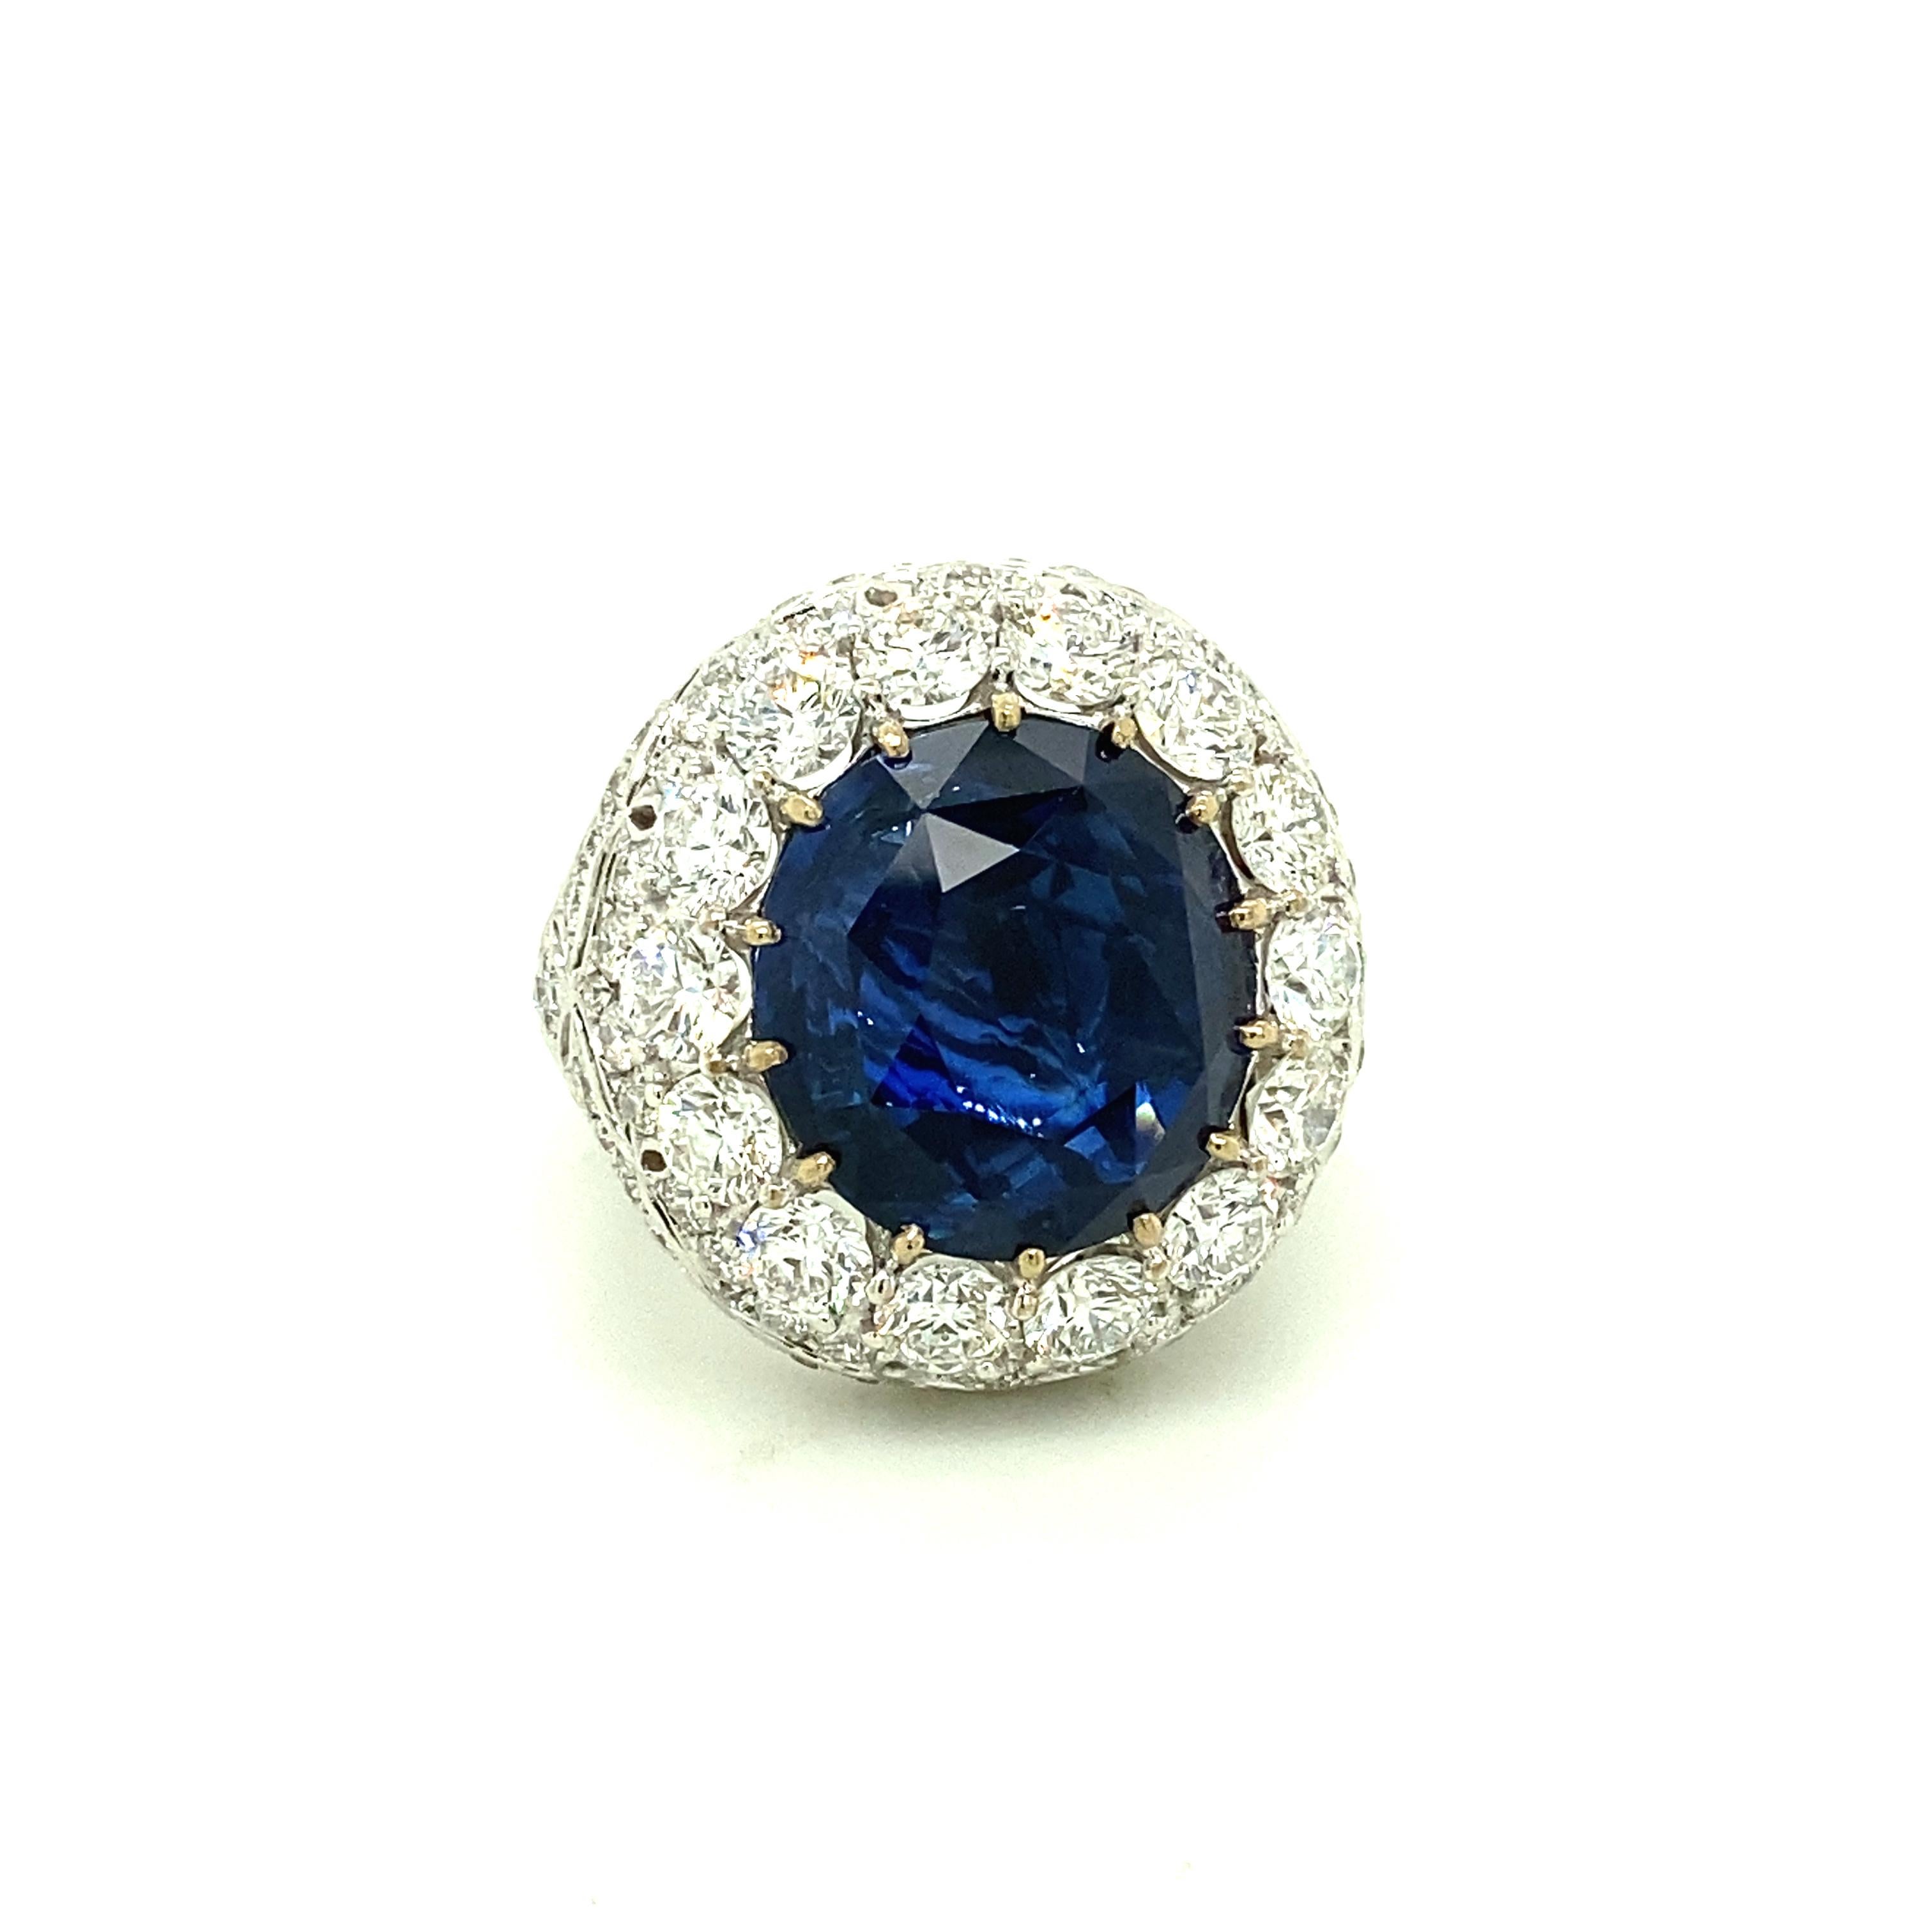 21.81 Carat IGI Certified Ceylon Sapphire and White Diamond Gold Cocktail Ring:

A stunning ring, it features a huge 21.81 carat IGI certified round-cut Ceylon (Sri Lanka) blue sapphire, surrounded by a halo of white round brilliant cut diamonds